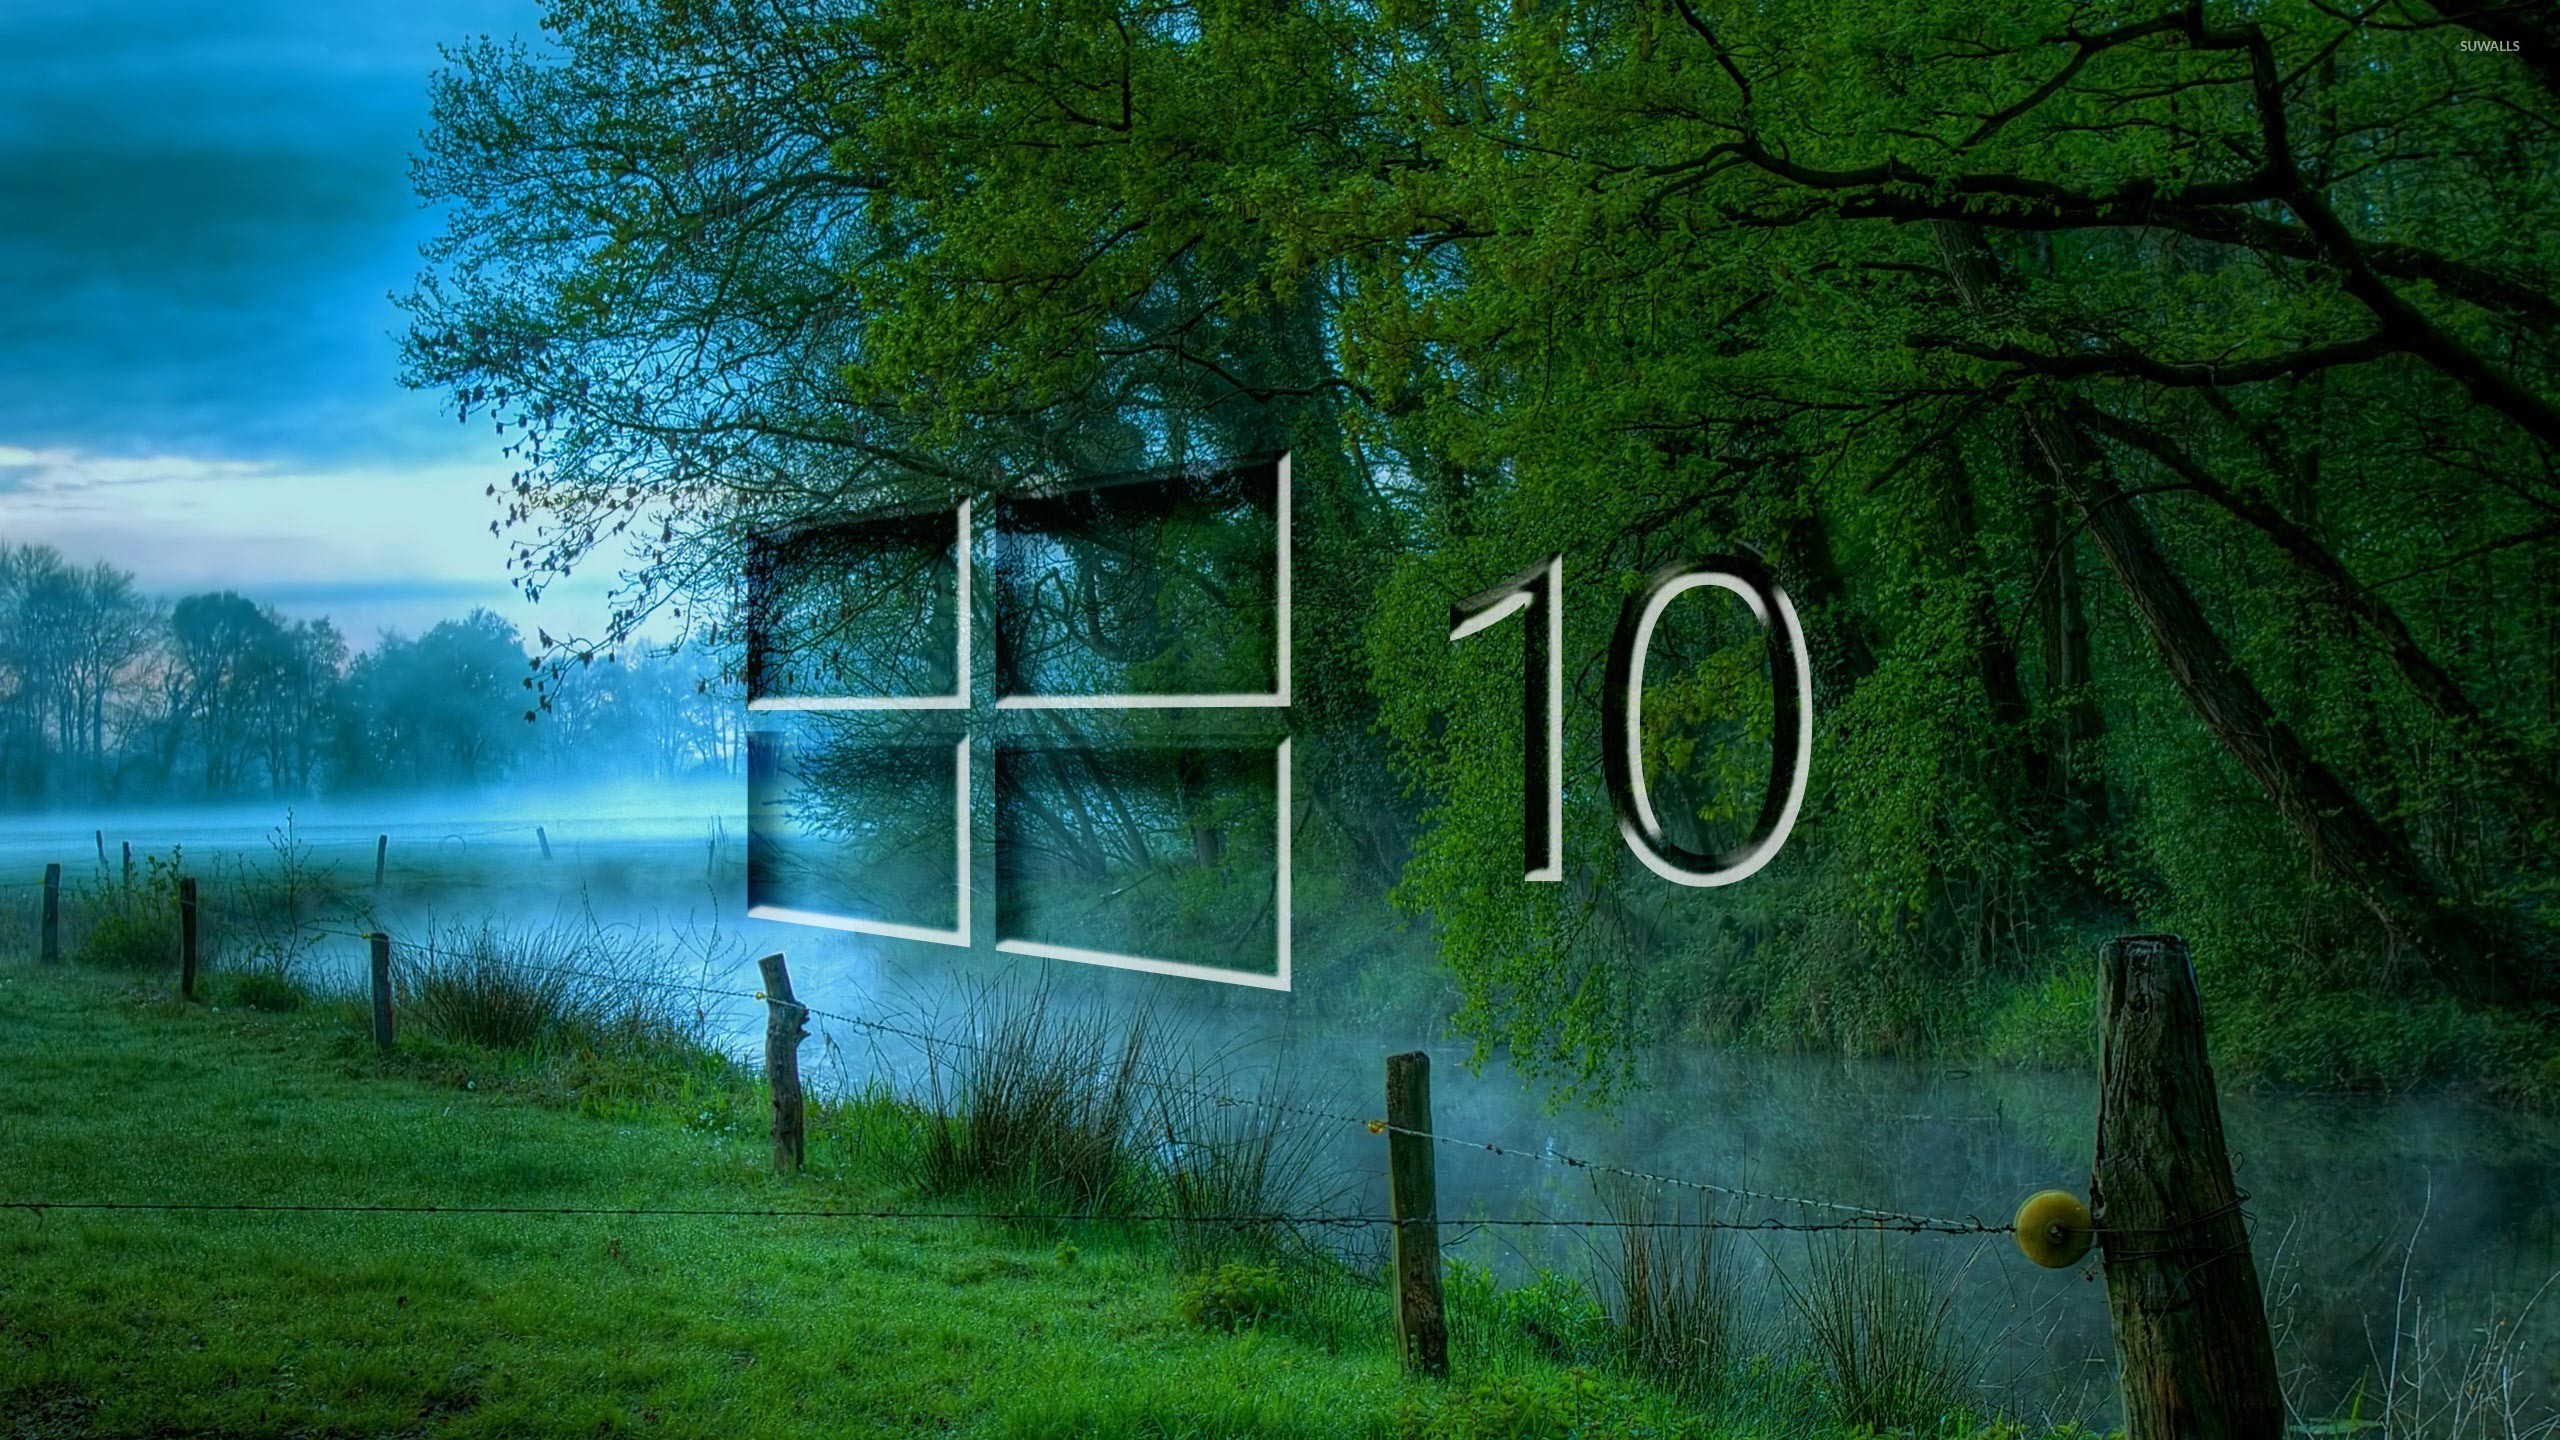 2560x1440 Windows 10 in the misty morning glass logo wallpaper - Computer .